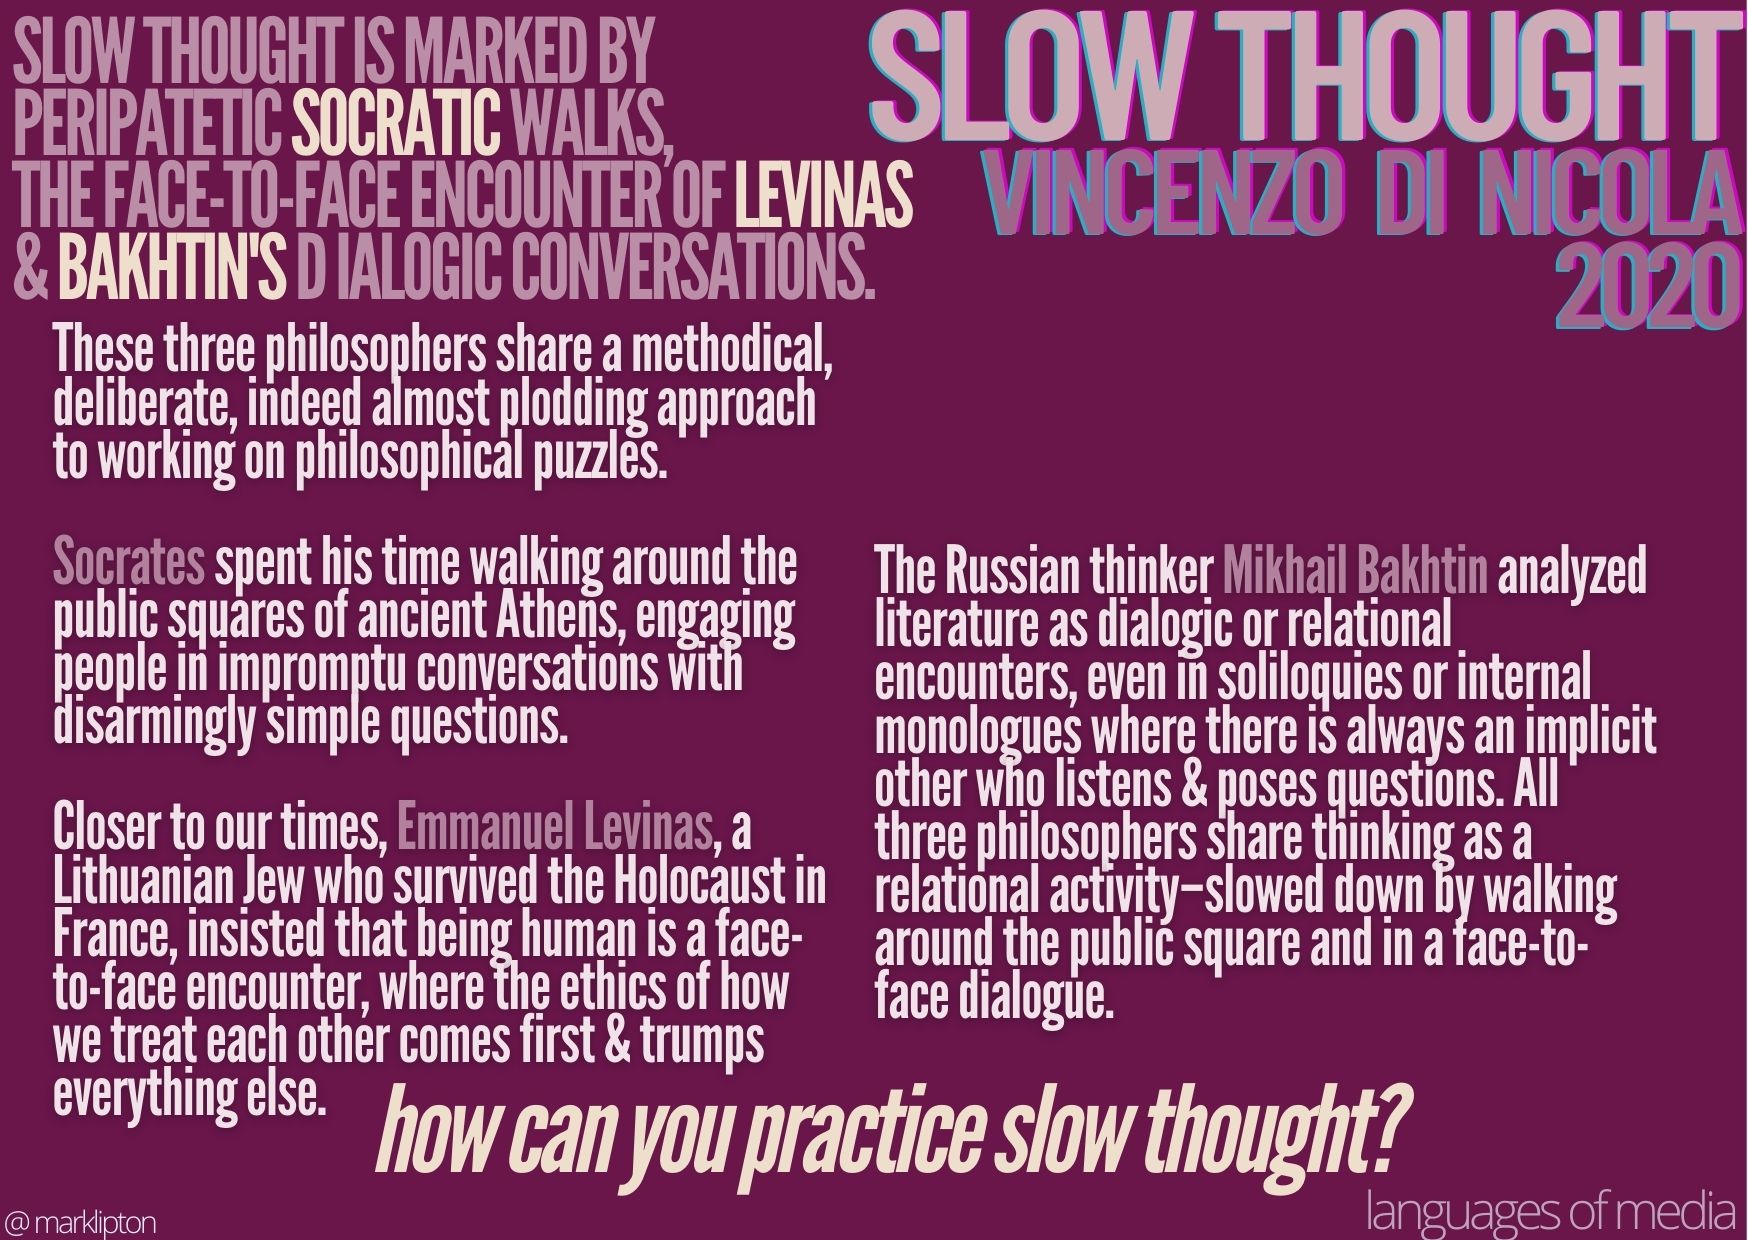 image: Slow Thought Is Marked By Peripatetic Socratic Walks, The Face-To-Face Encounter Of Levinas & Bakhtin's Dialogic Conversations. These three philosophers share a methodical, deliberate, indeed almost plodding approach to working on philosophical puzzles. Socrates spent his time walking around the public squares of ancient Athens, engaging people in impromptu conversations with disarmingly simple questions. Closer to our times, Emmanuel Levinas, a Lithuanian Jew who survived the Holocaust in France, insisted that being human is a face-to-face encounter, where the ethics of how we treat each other comes first & trumps everything else. The Russian thinker Mikhail Bakhtin analyzed literature as dialogic or relational encounters, even in soliloquies or internal monologues where there is always an implicit other who listens & poses questions. All three philosophers share thinking as a relational activity–slowed down by walking around the public square and in a face-to-face dialogue. How can you practice slow thought?